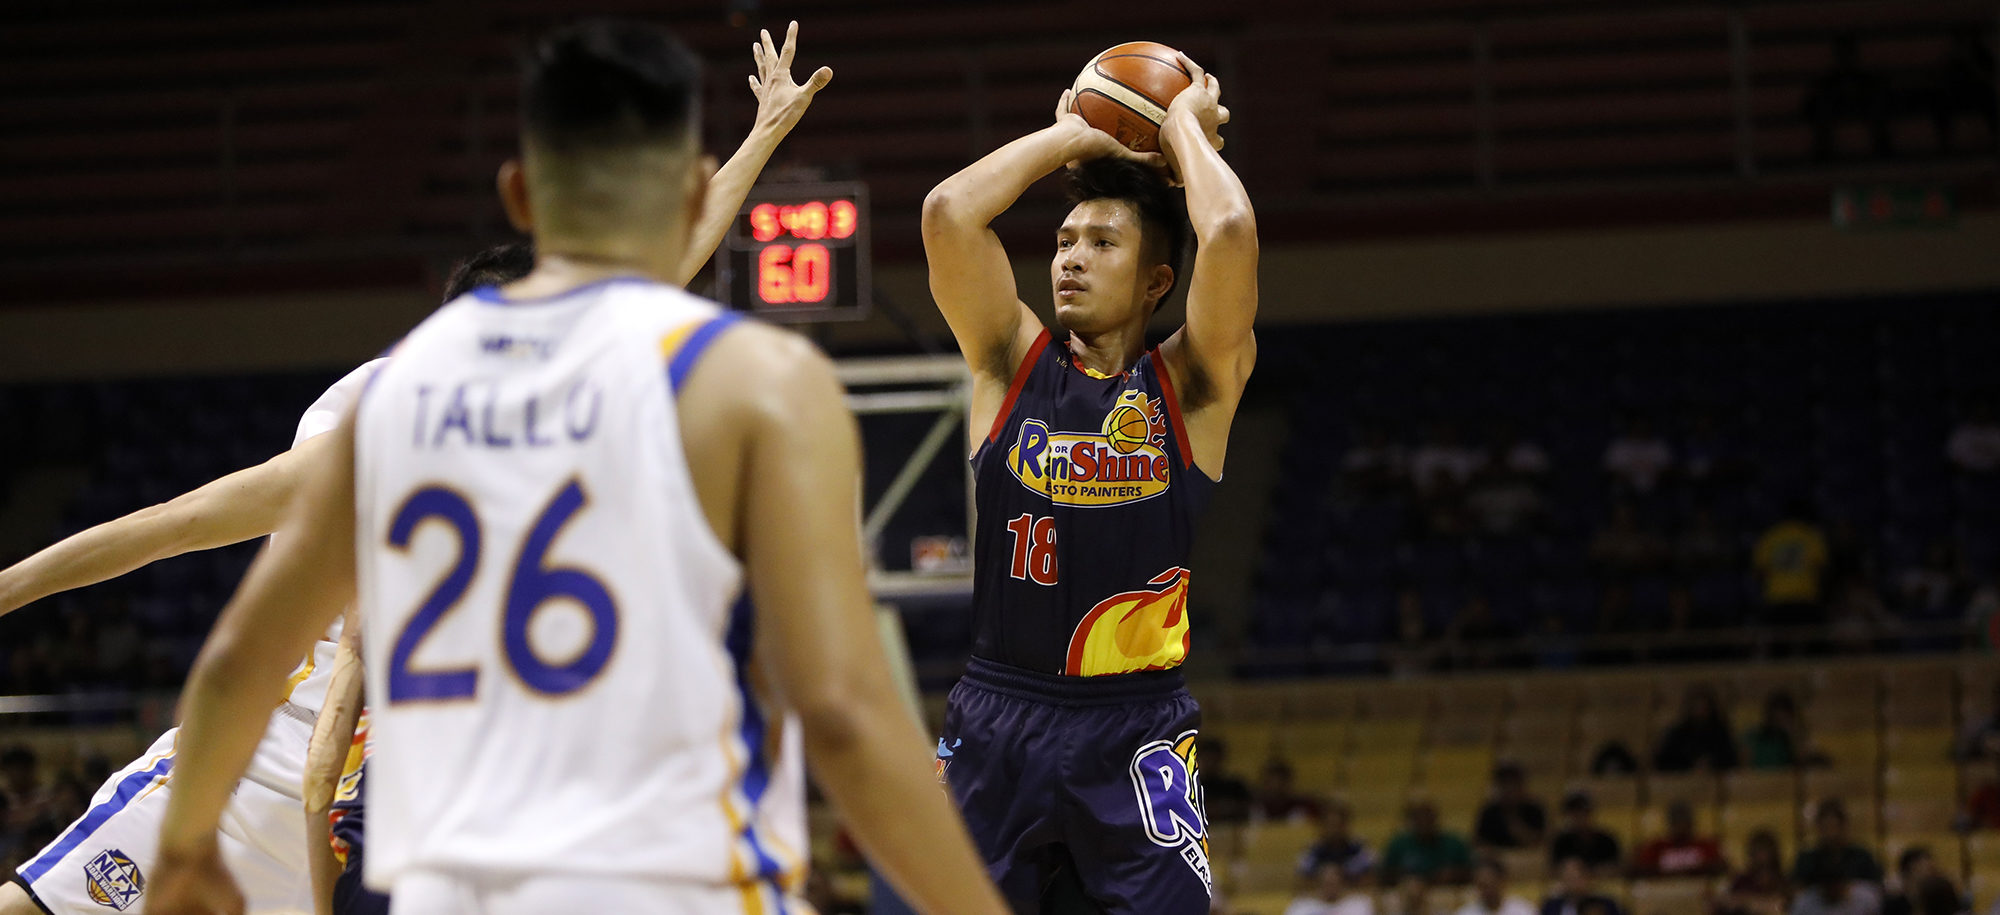 Not Big Game James for nothing: Yap's resurgence in full display in Rain or Shine's hot start